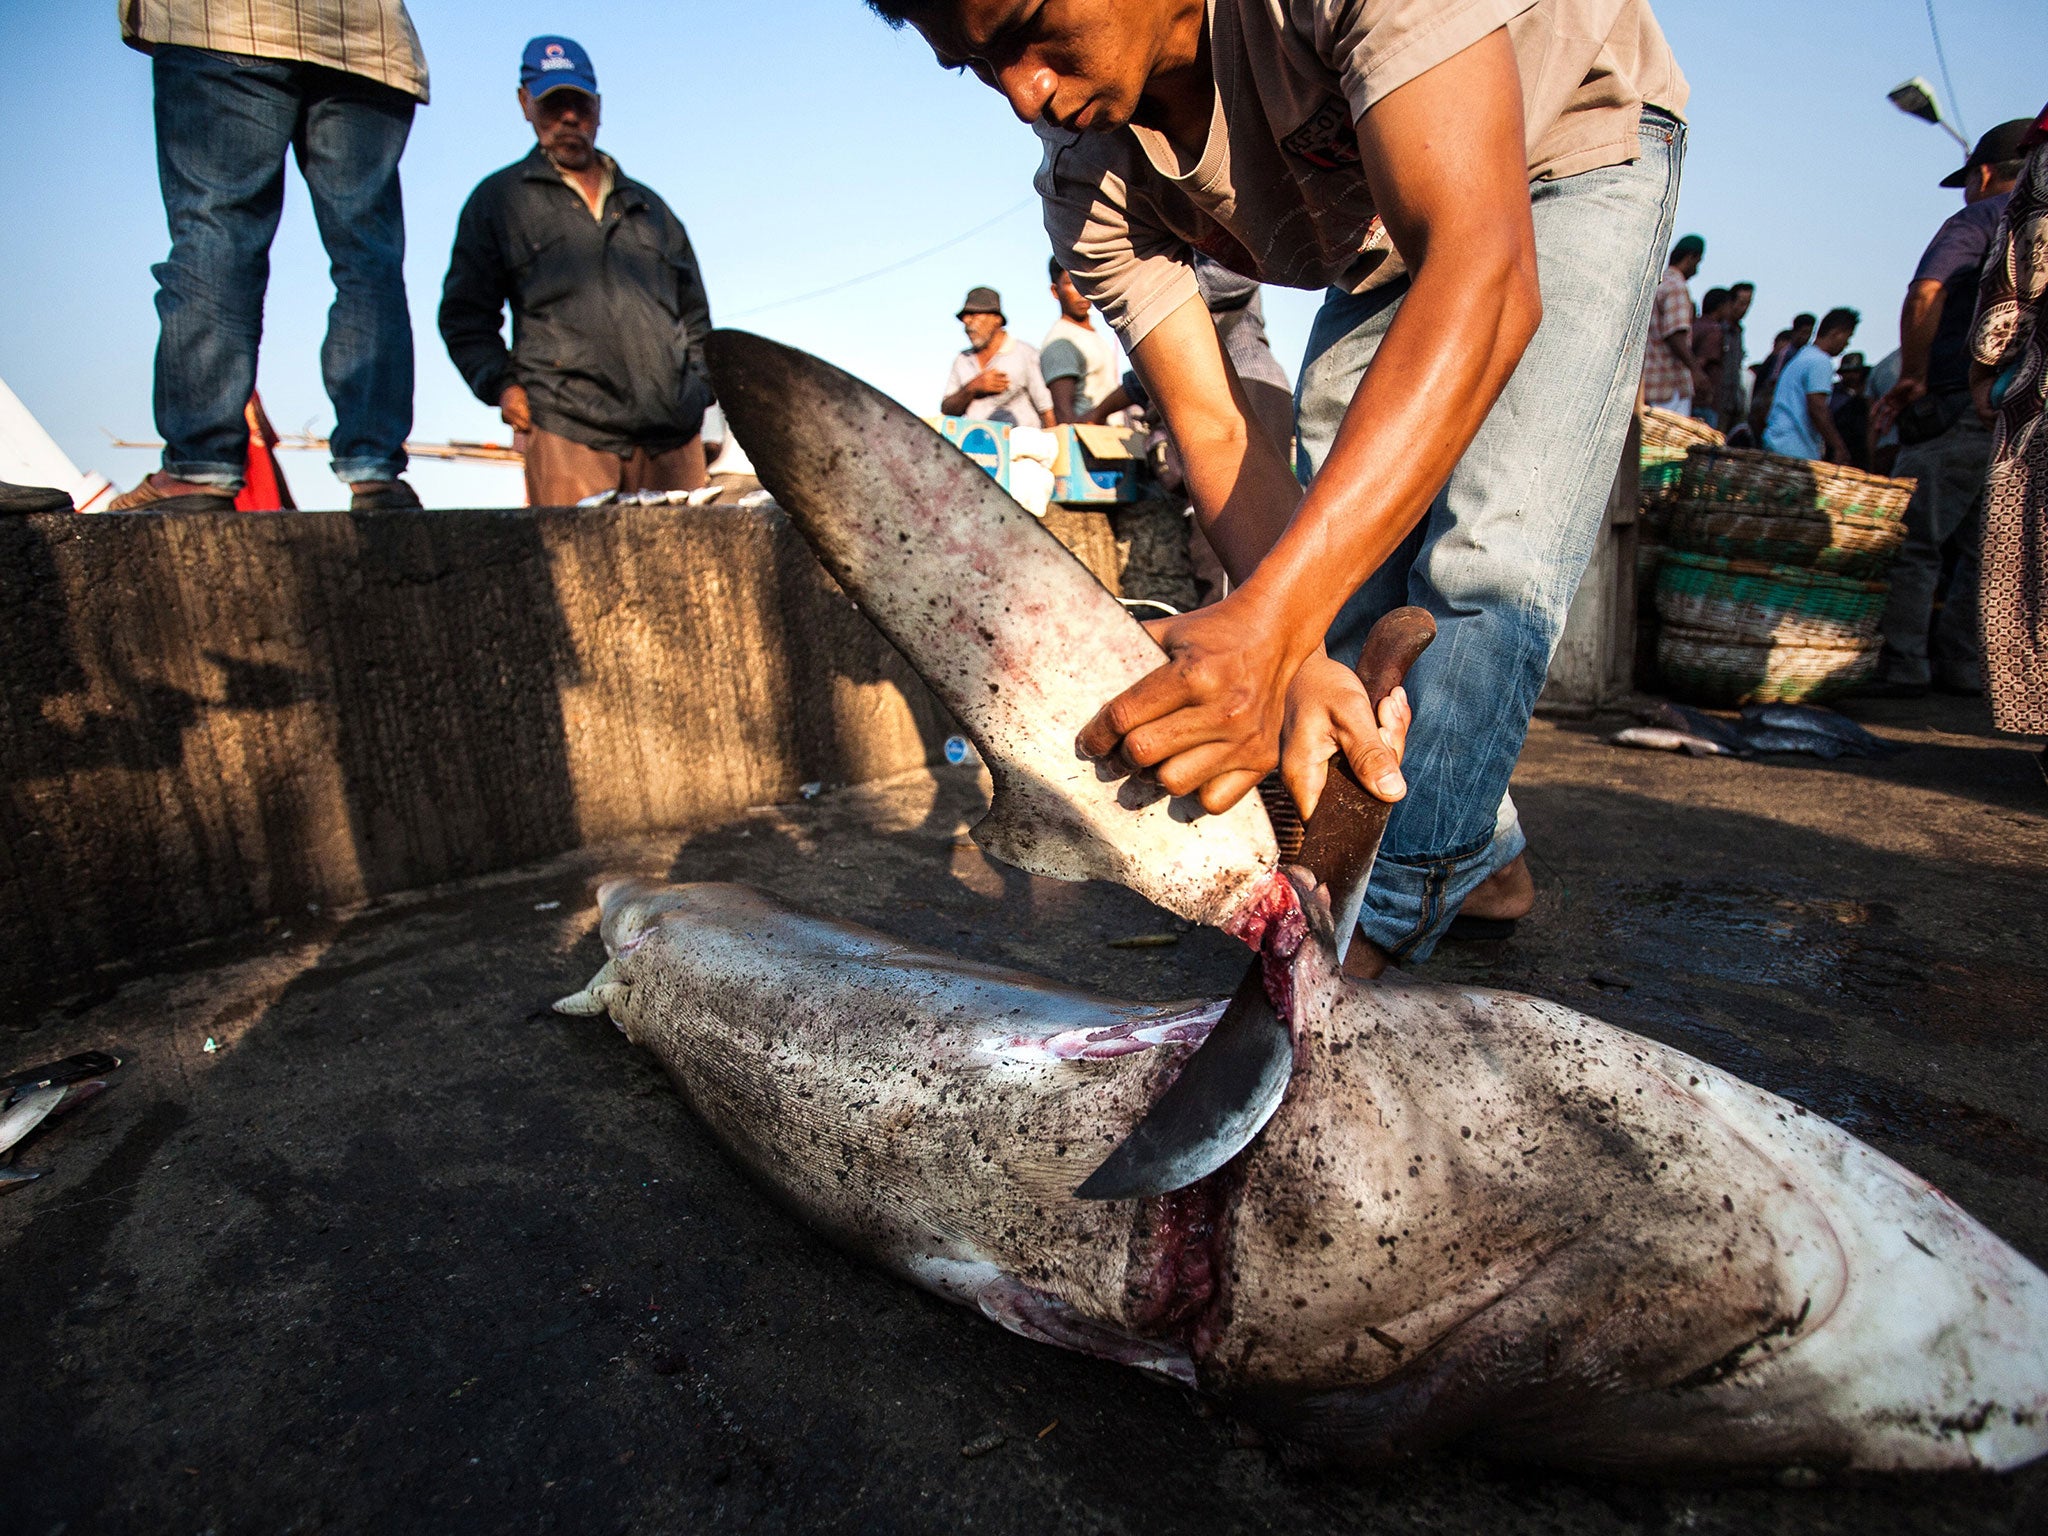 About 100 million sharks are slaughtered each year, mostly to meet demand from affluent Chinese for shark fin soup